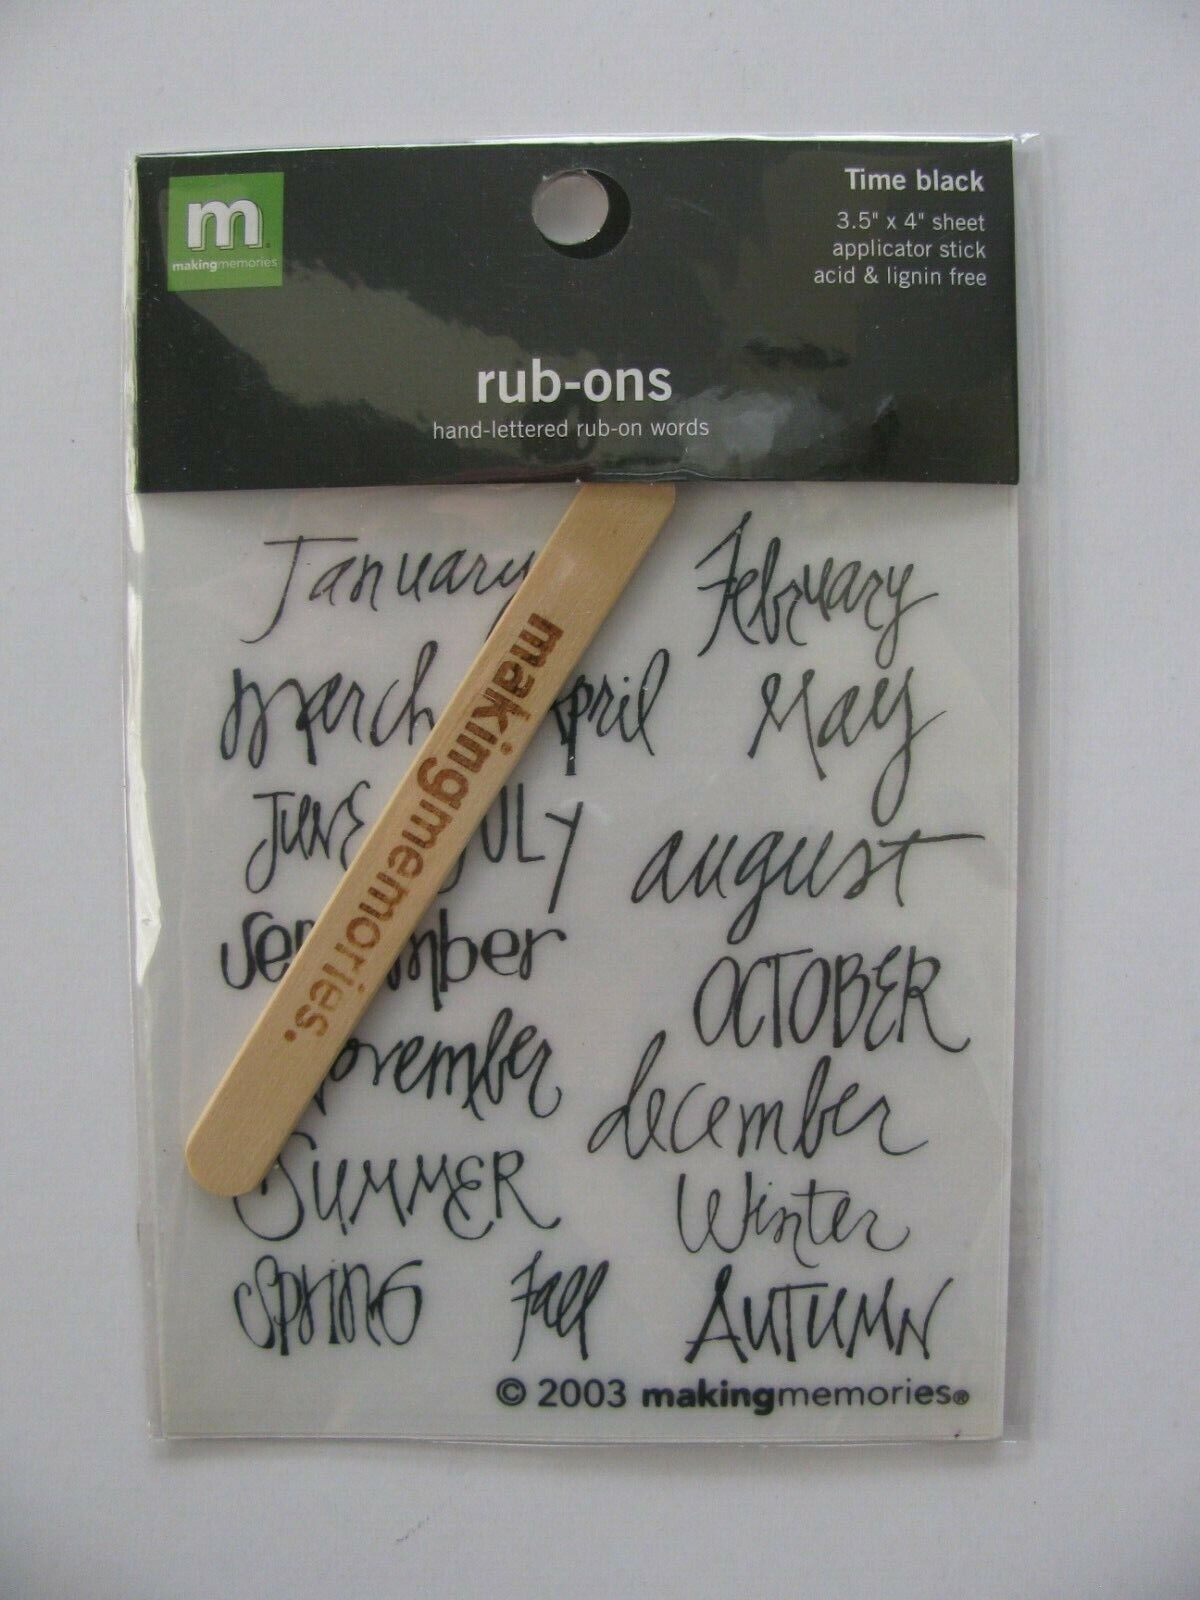 Making Memories Hand Lettered Rub-On Words TIME BLACK 3.5 X 4 NIP FREE SHIPPING